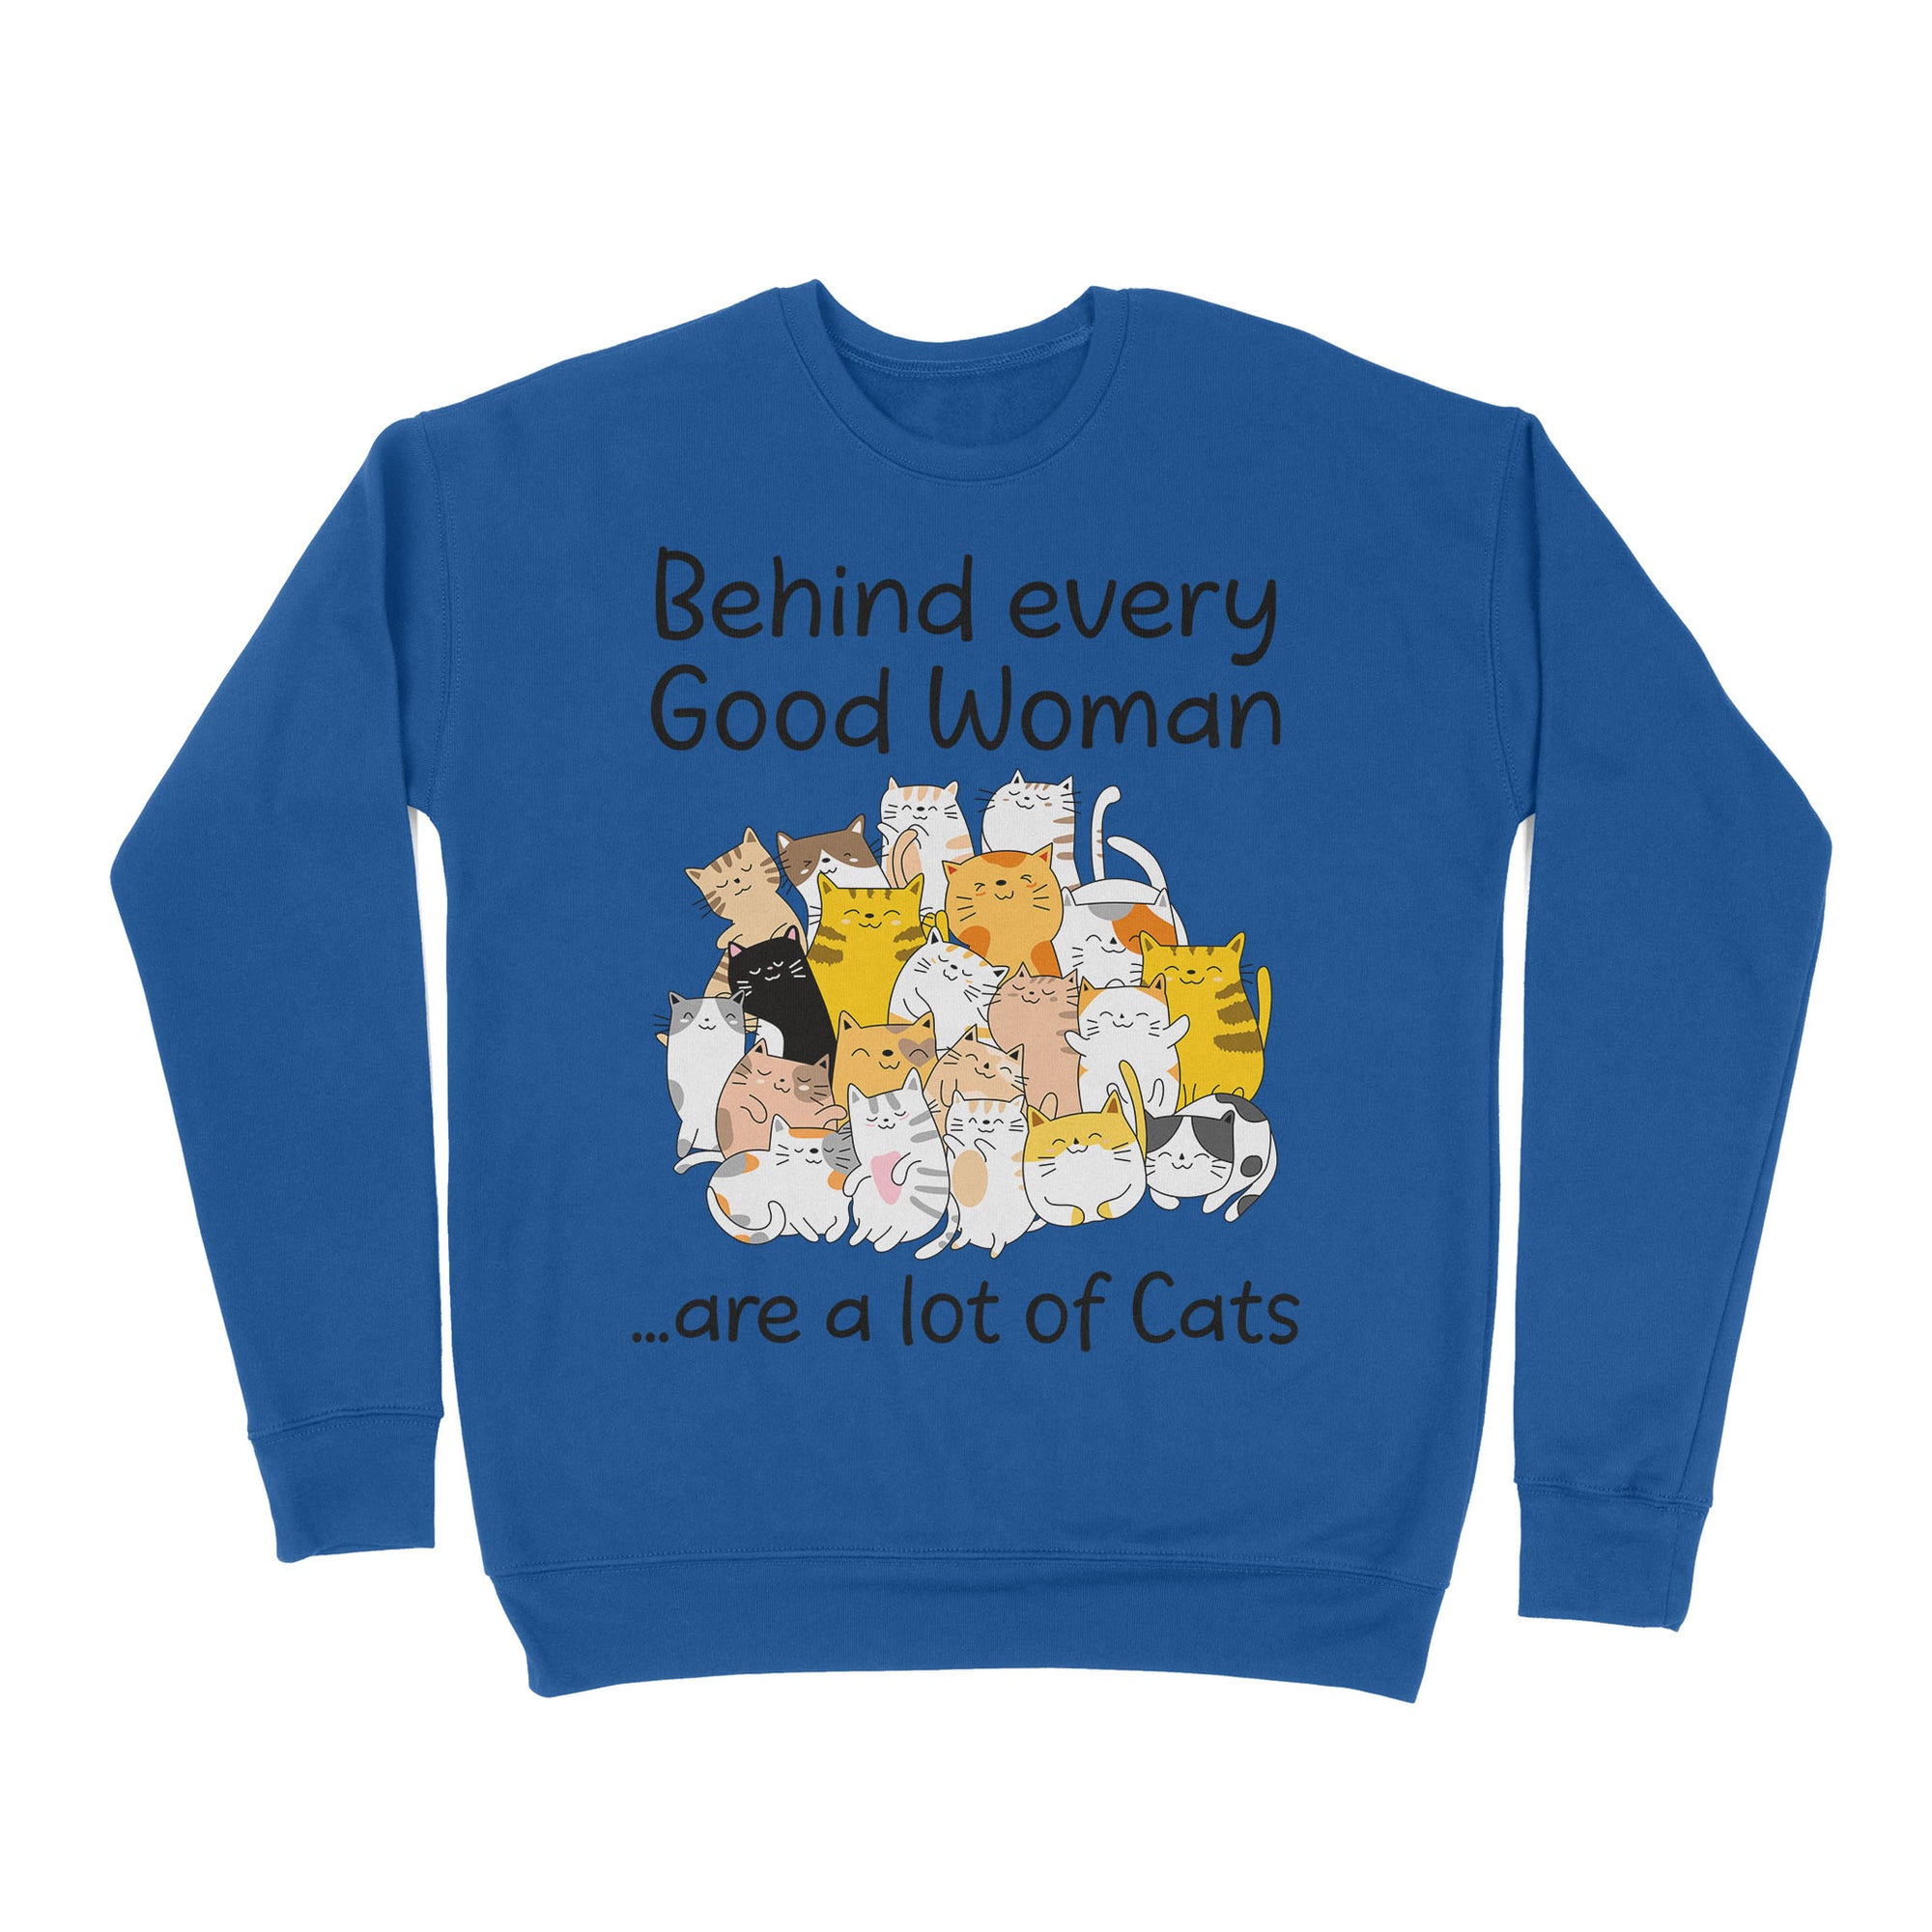 Premium Crew Neck Sweatshirt - Behind Every Good Woman Are A Lot Of Cats